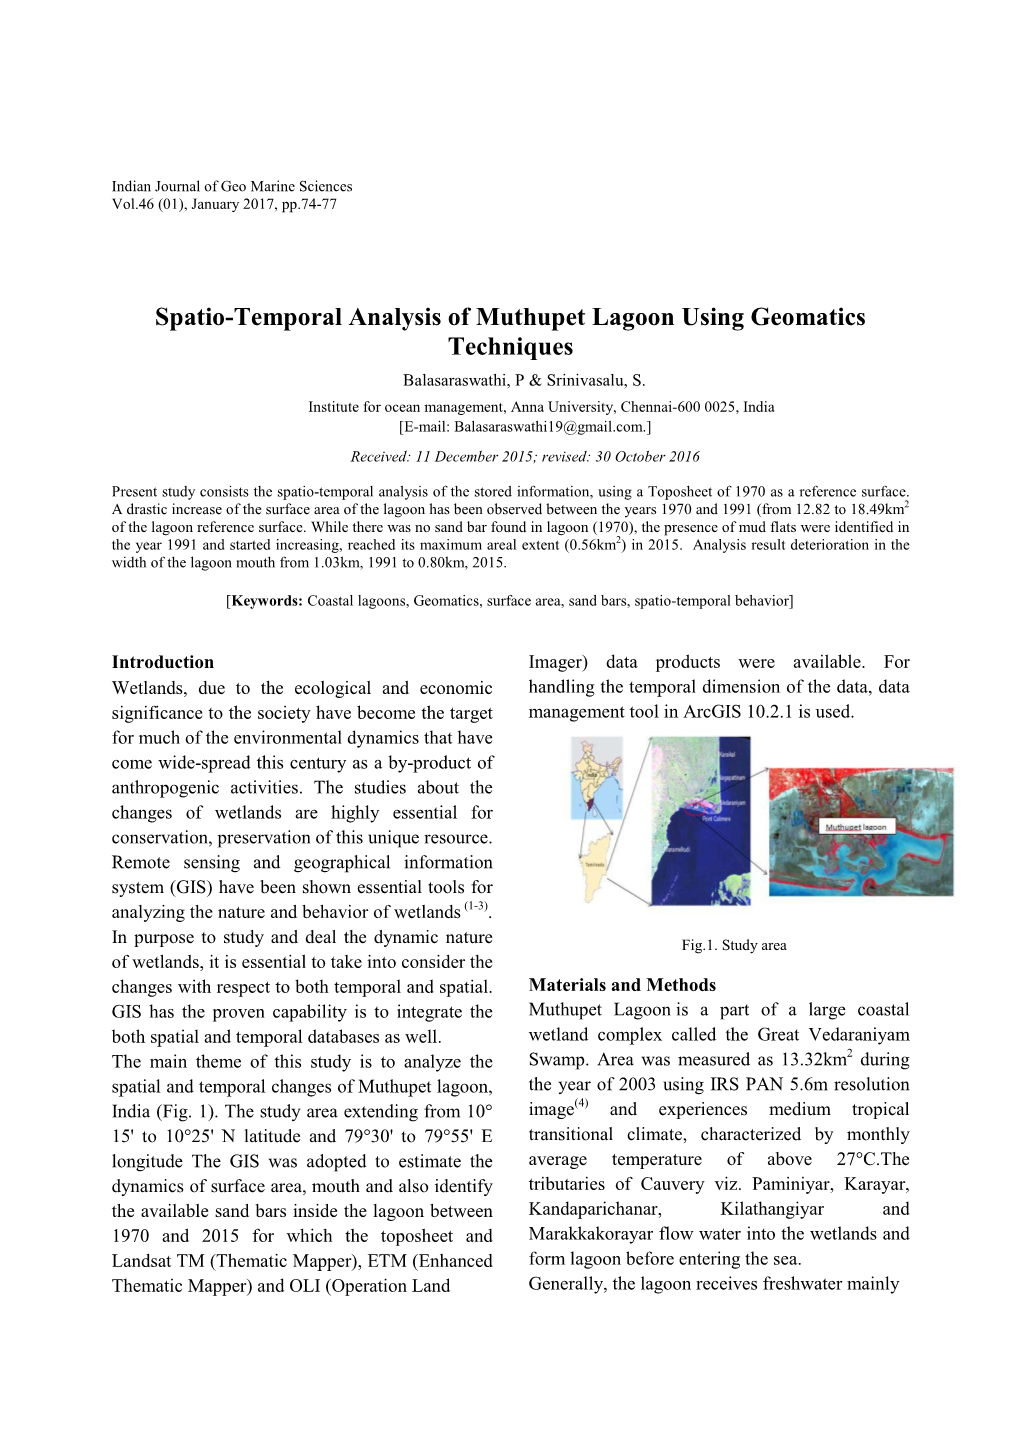 Spatio-Temporal Analysis of Muthupet Lagoon Using Geomatics Techniques